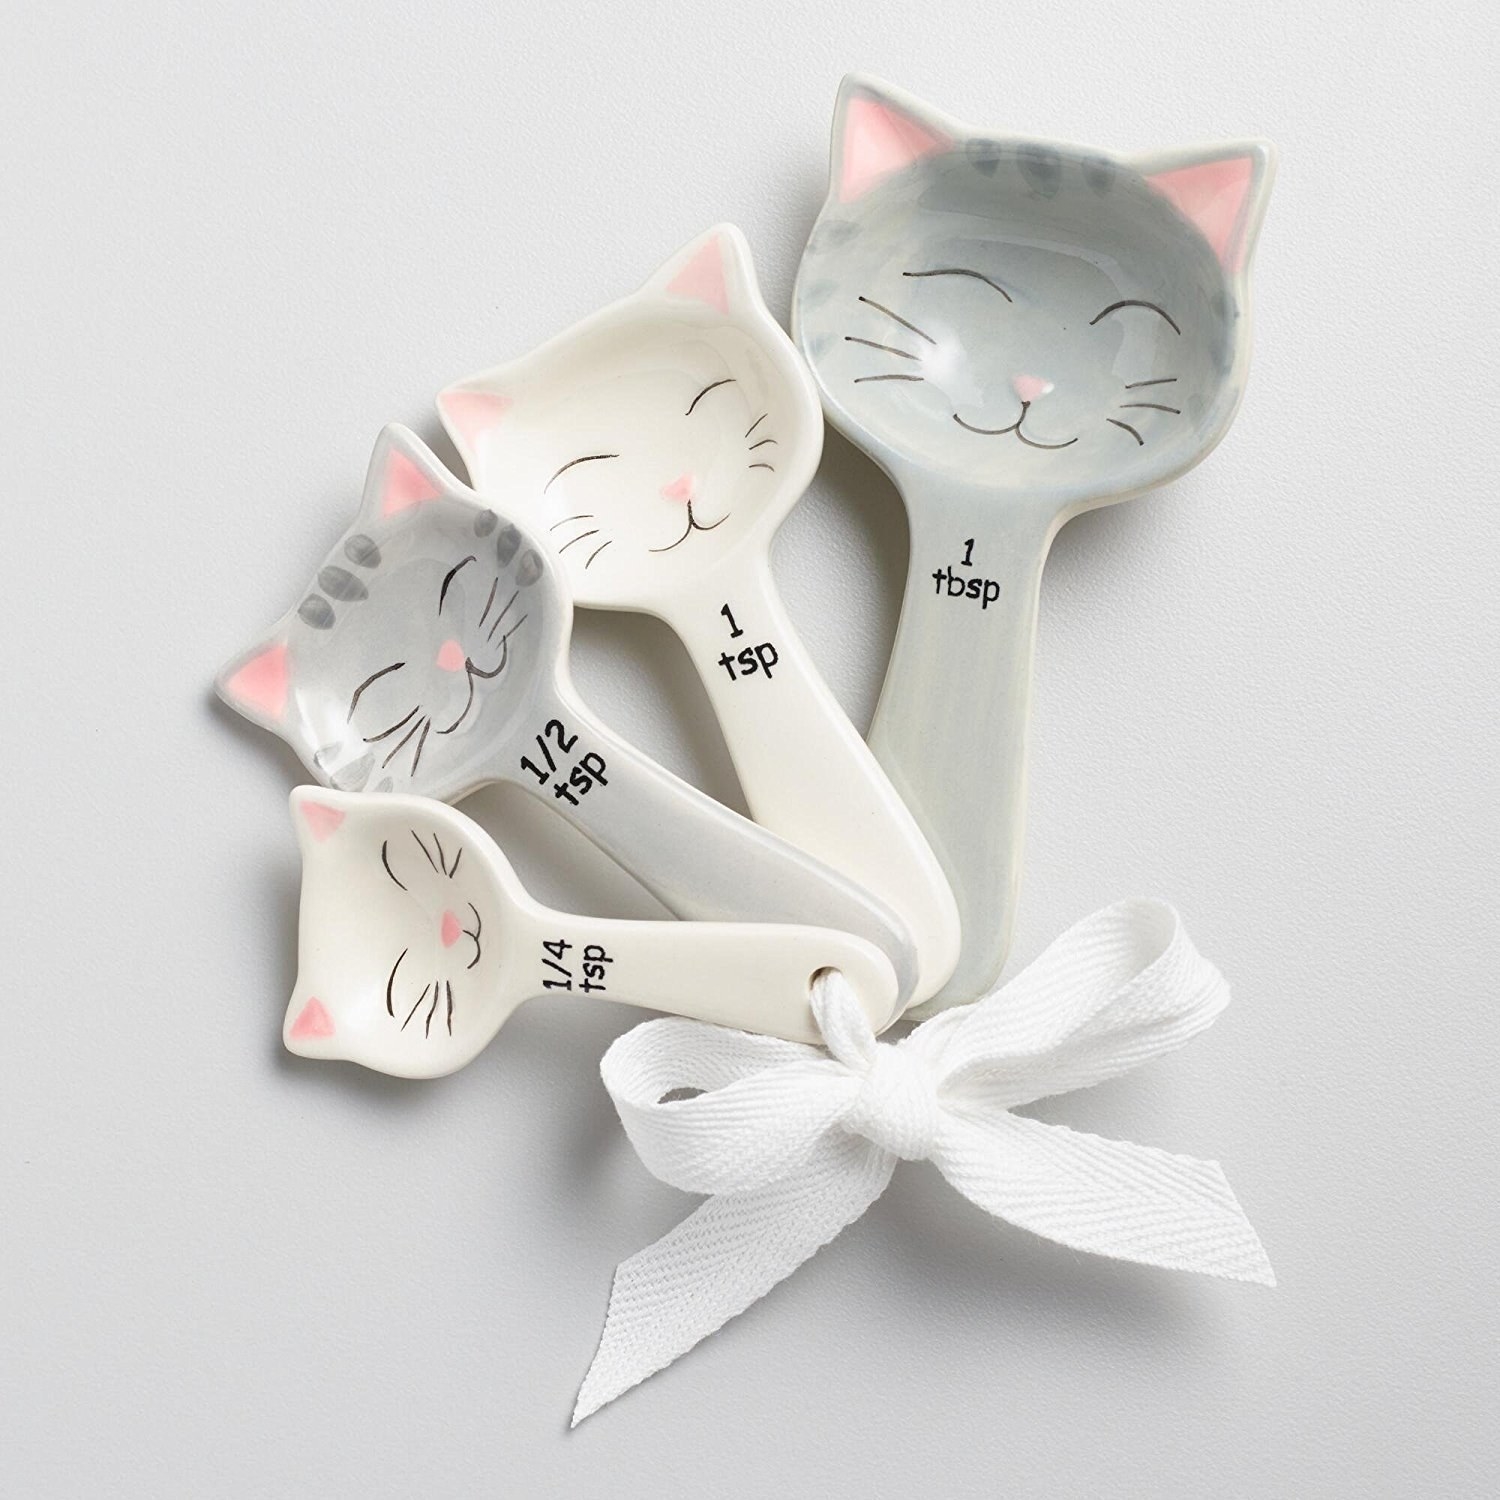 the set of measuring spoons with happy cat faces painted on them 